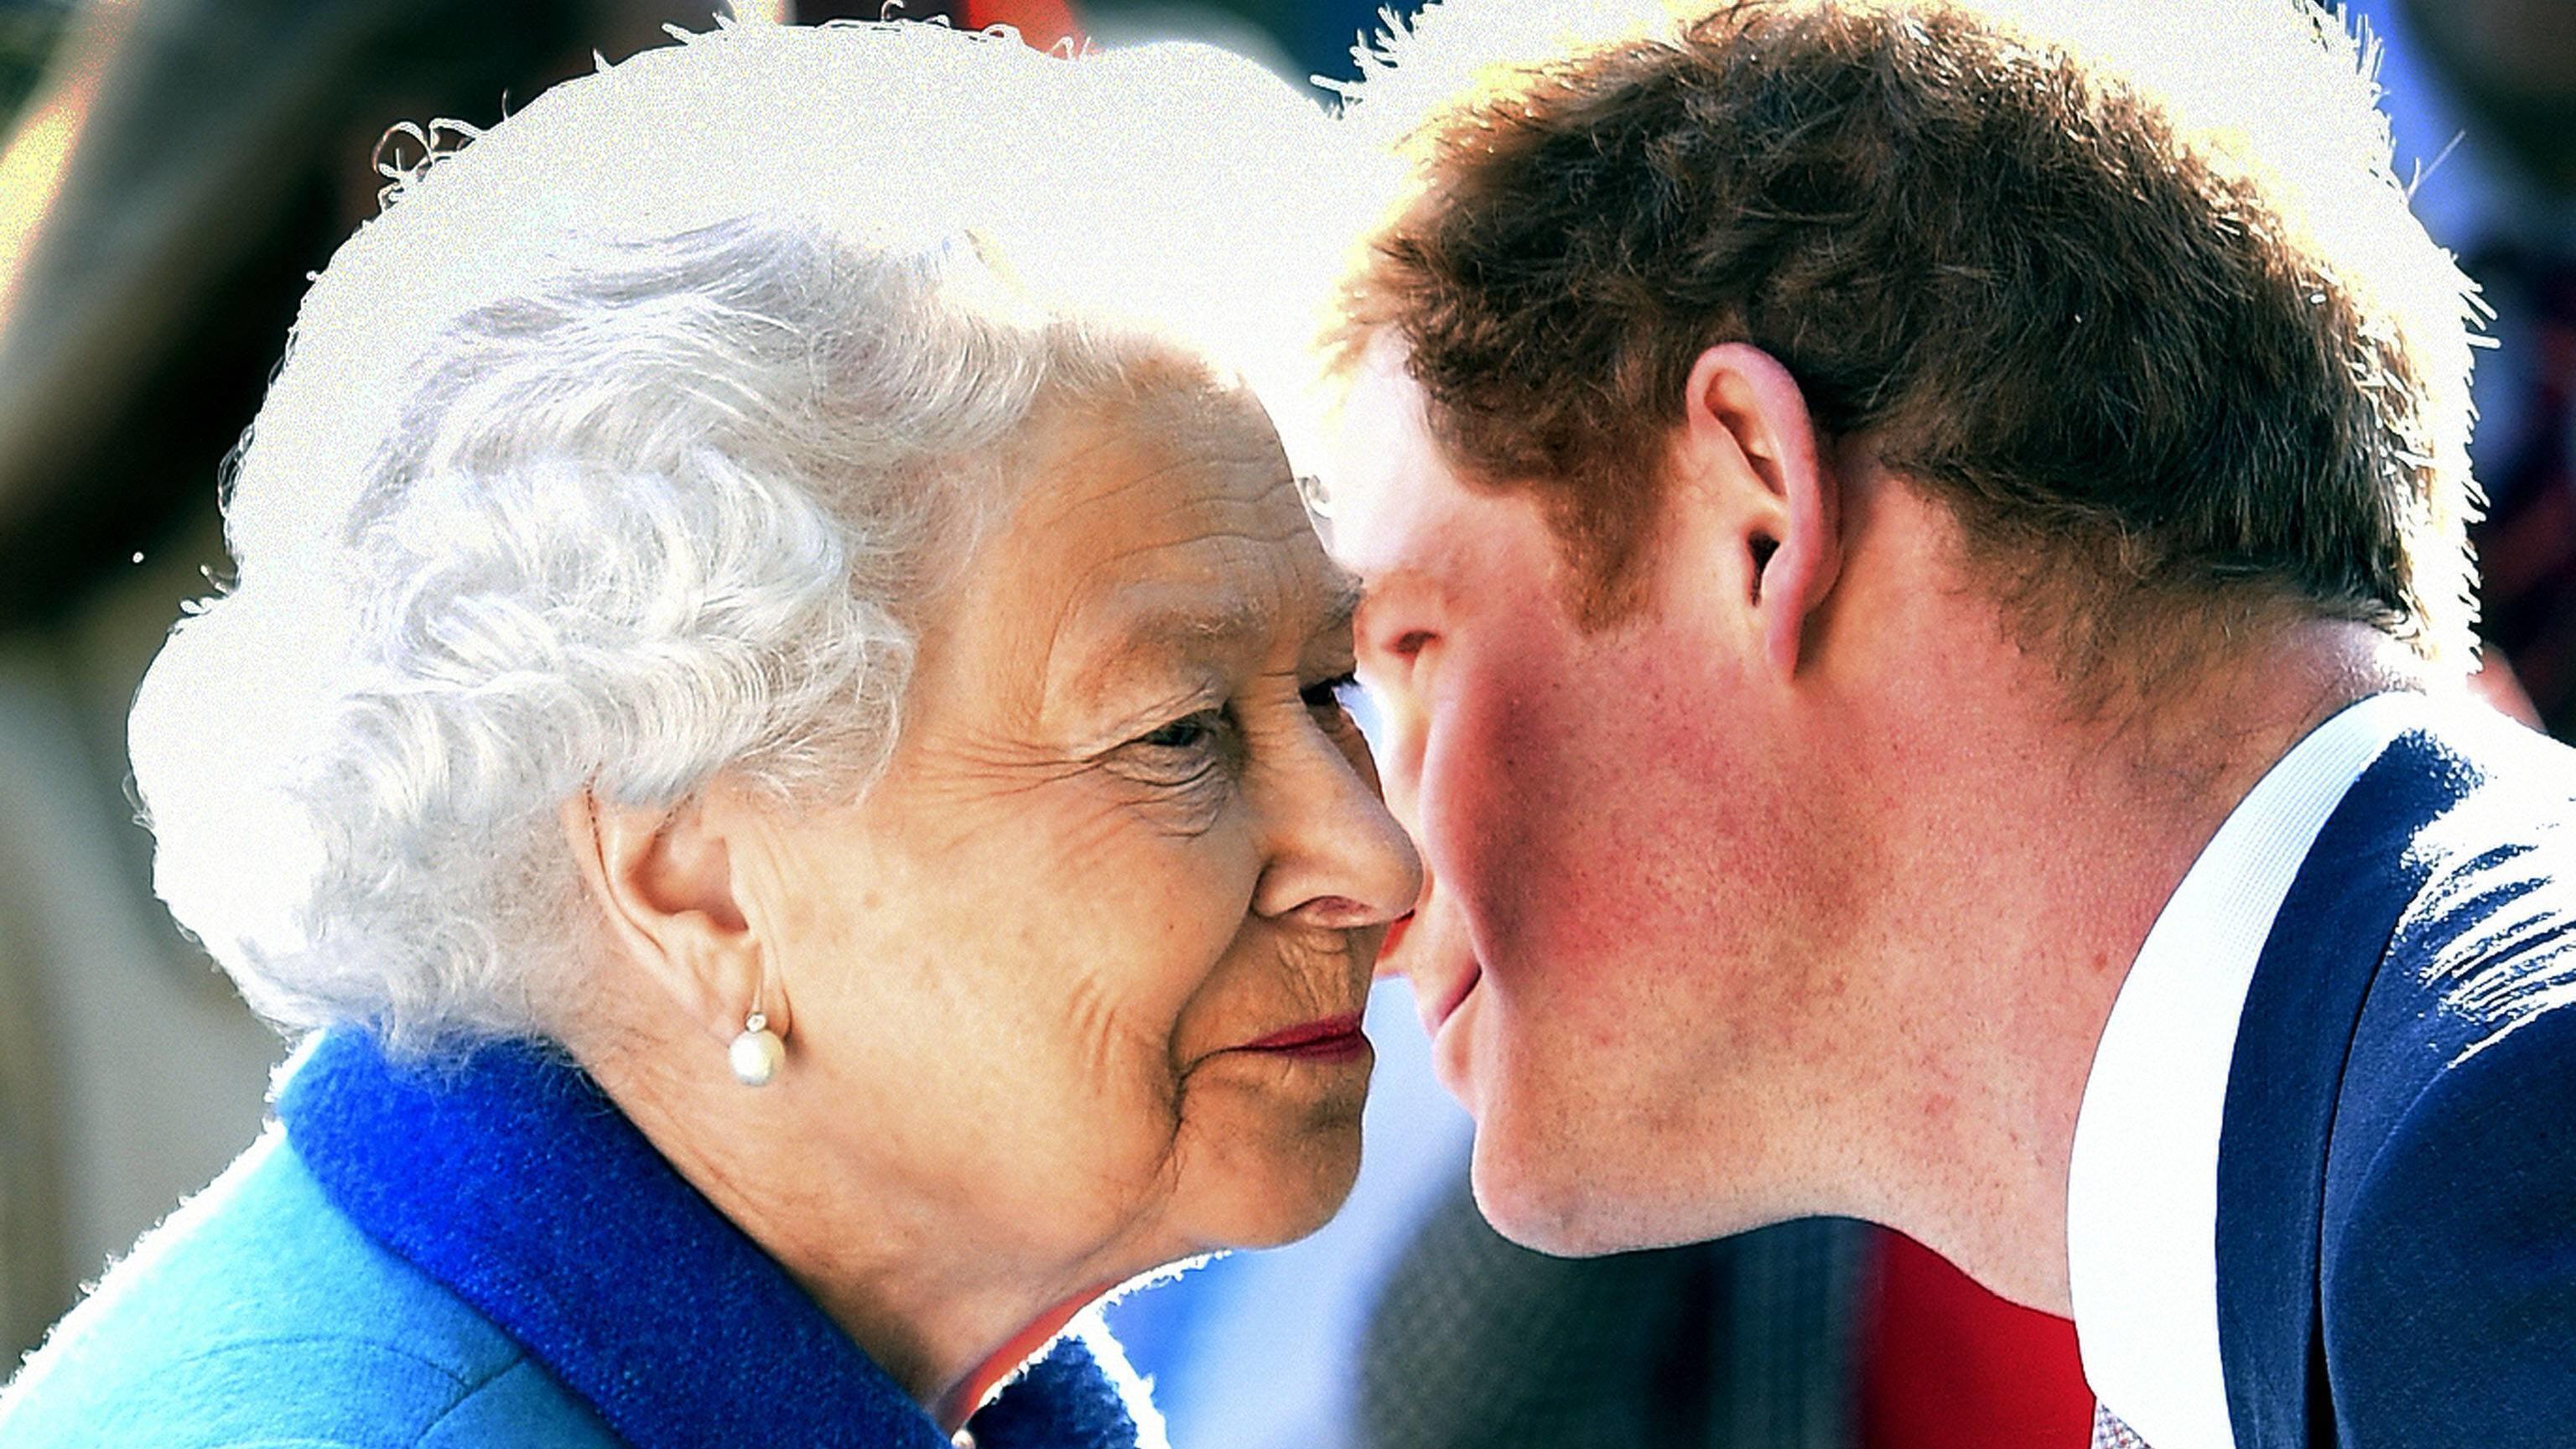  May 18, 2015 - London, GREAT BRITAIN - Britain s Queen Elizabeth greets her grandson Prince Harry at the Royal Horticultural Society Chelsea Flower Show 2015 in London Monday May 18, 2015. Horticulturists from around the world are displaying their g